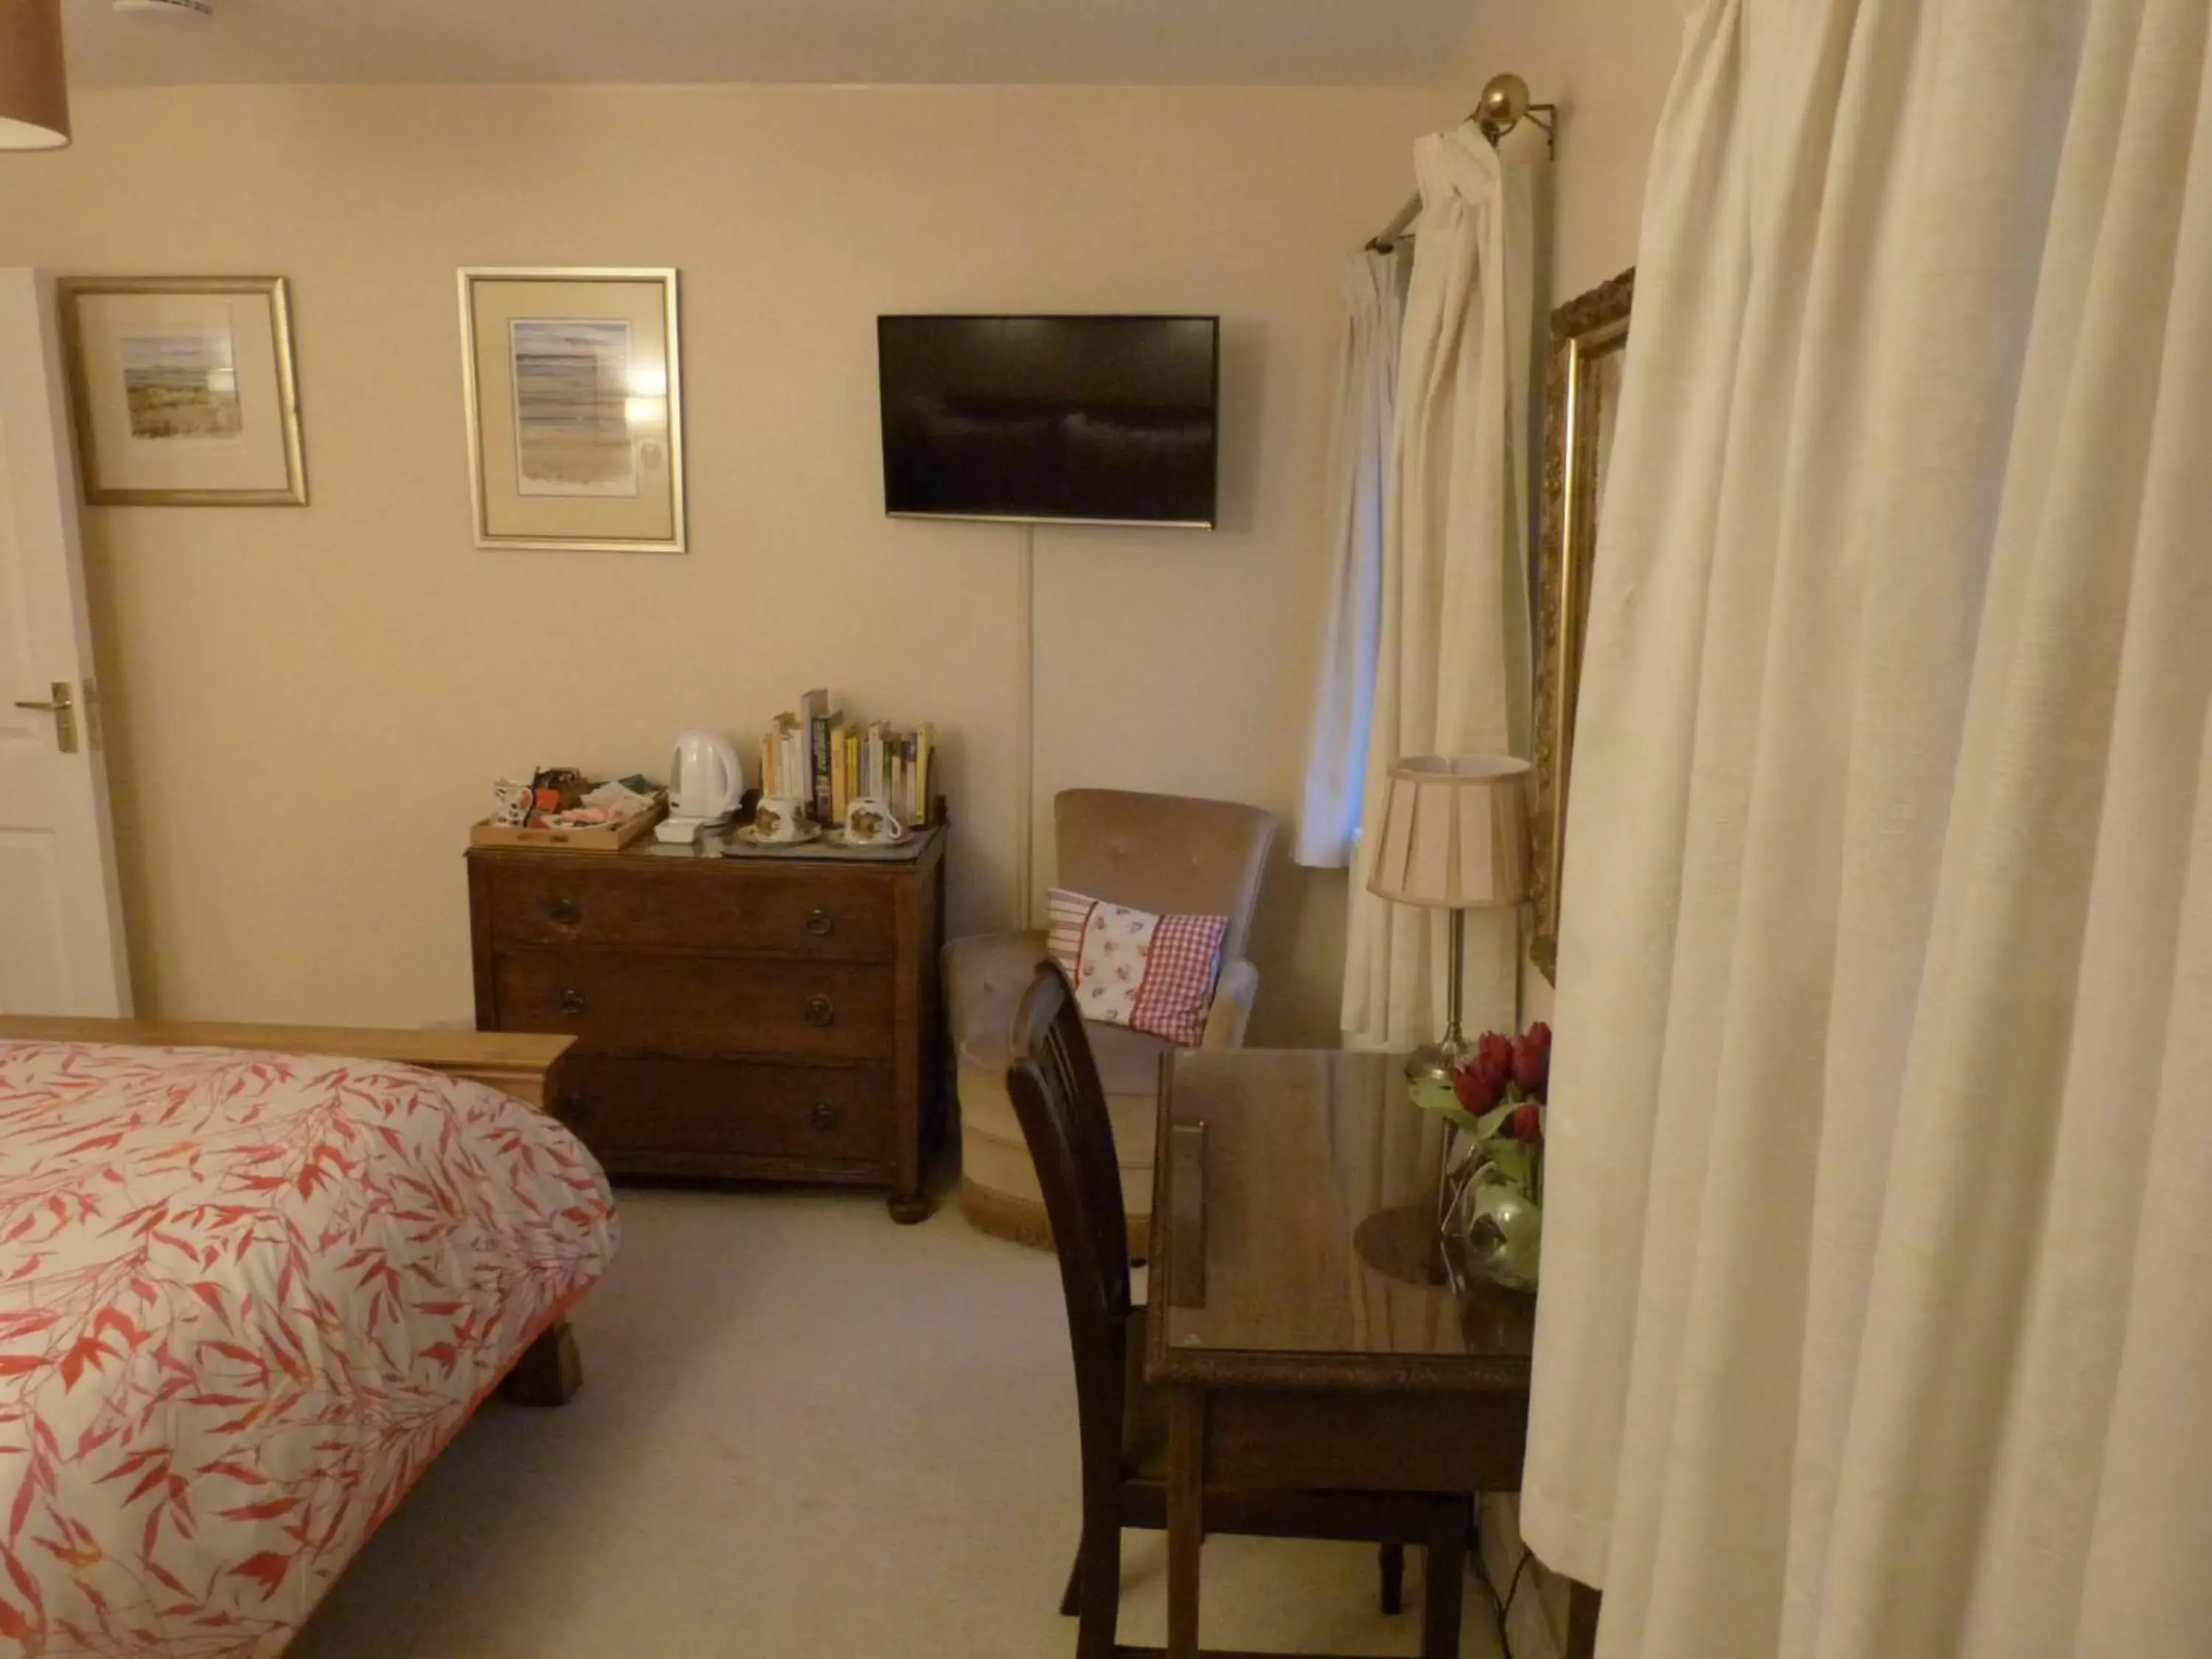 Bedroom, TV/Entertainment Center in The Old Posthouse B&B